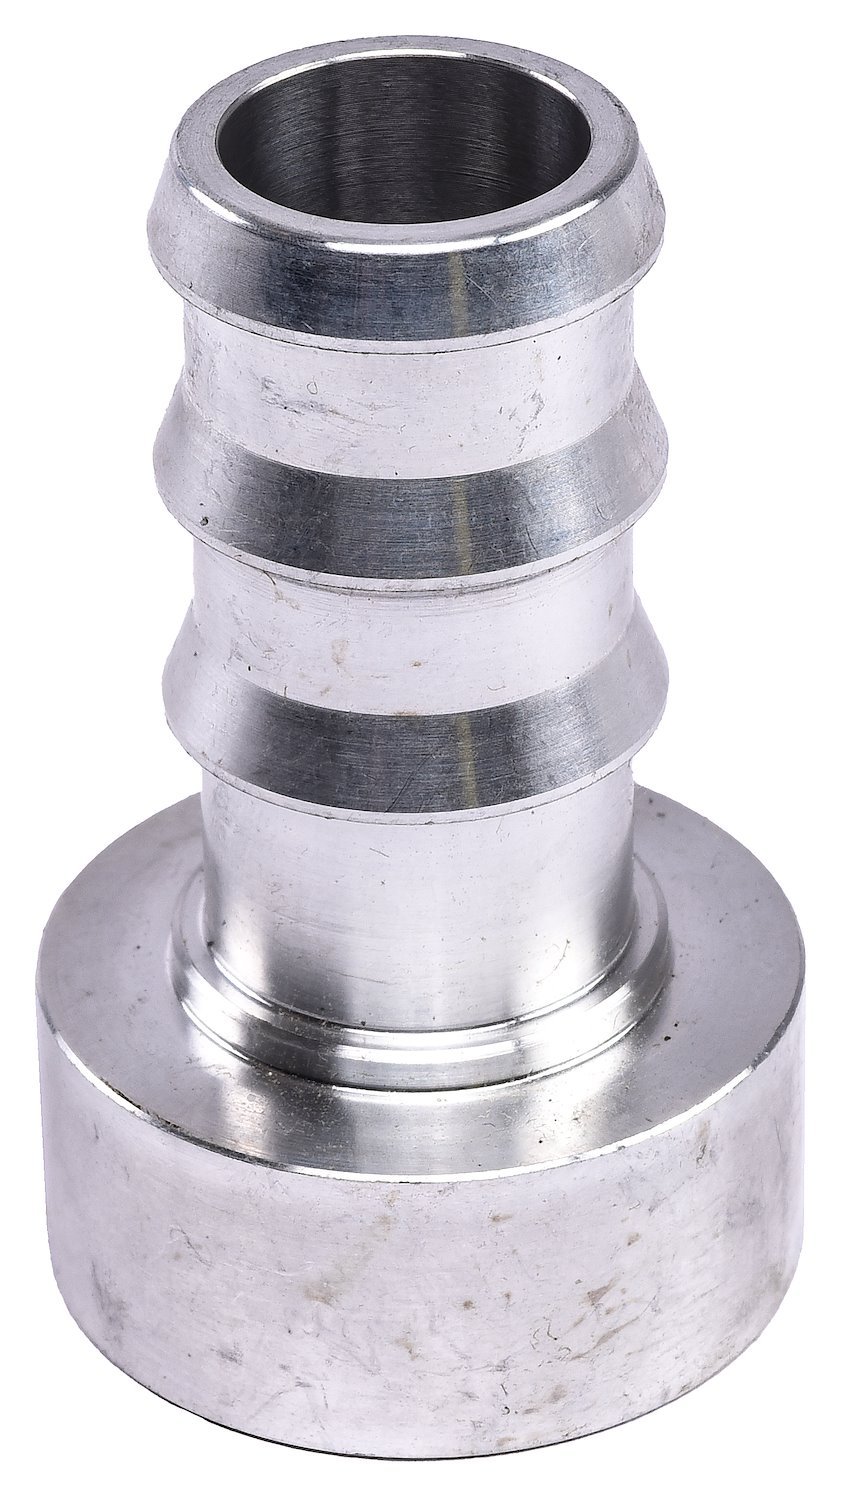 Weld-On Hose Barb Fitting with 3/4 in. Hose Barb [Aluminum]